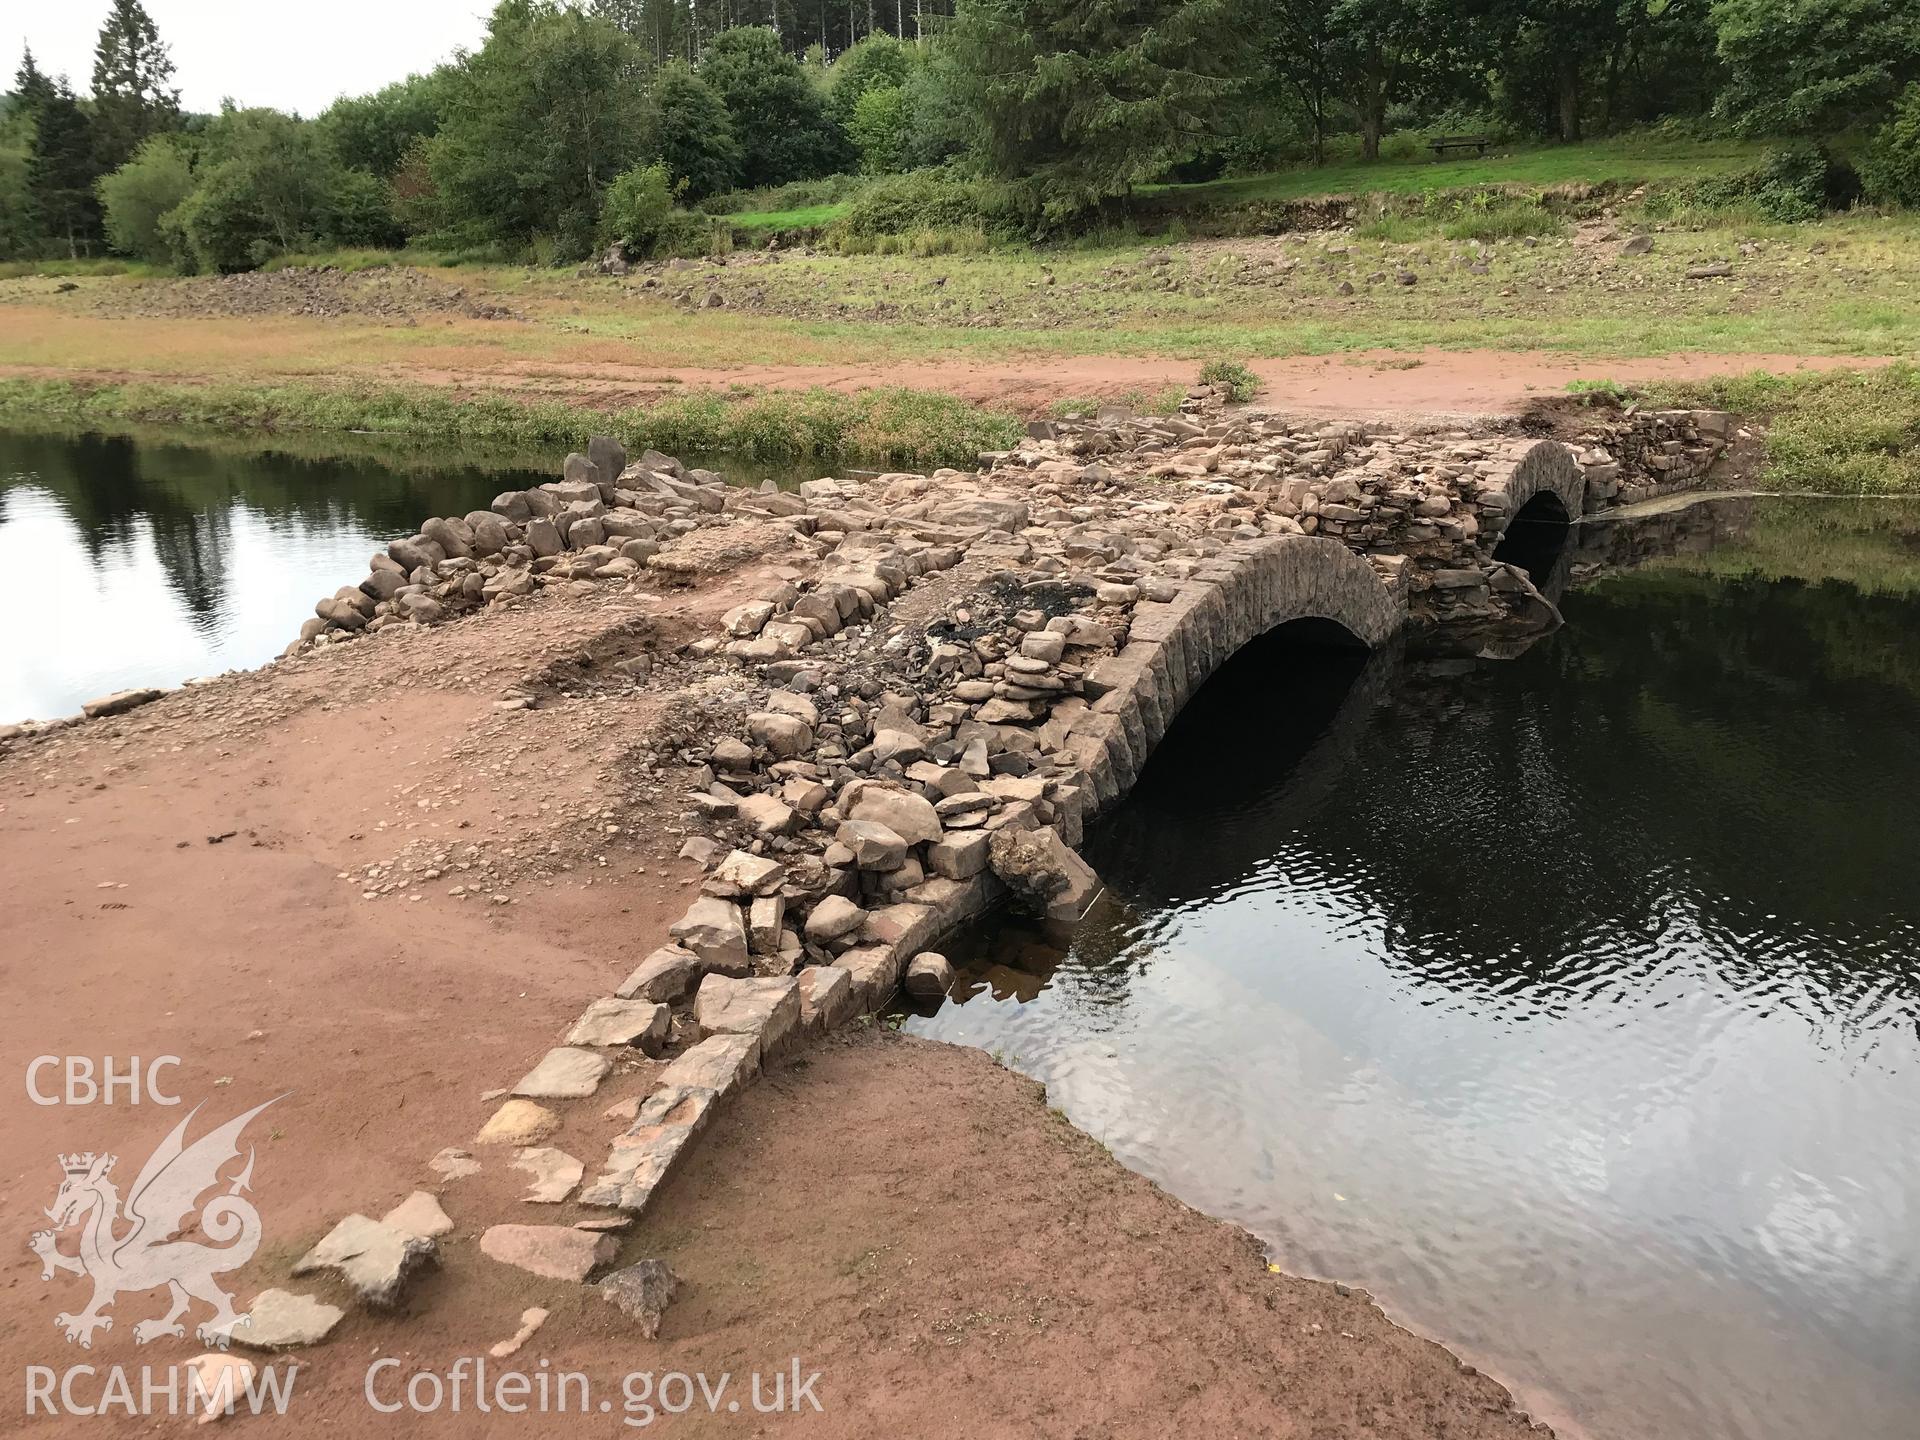 Pont ar Daf - usually submerged by the Llwyn-on reservoir but revealed during the drought conditions of the summer of 2018. Colour photograph taken by Paul R. Davis on 25th August 2018.